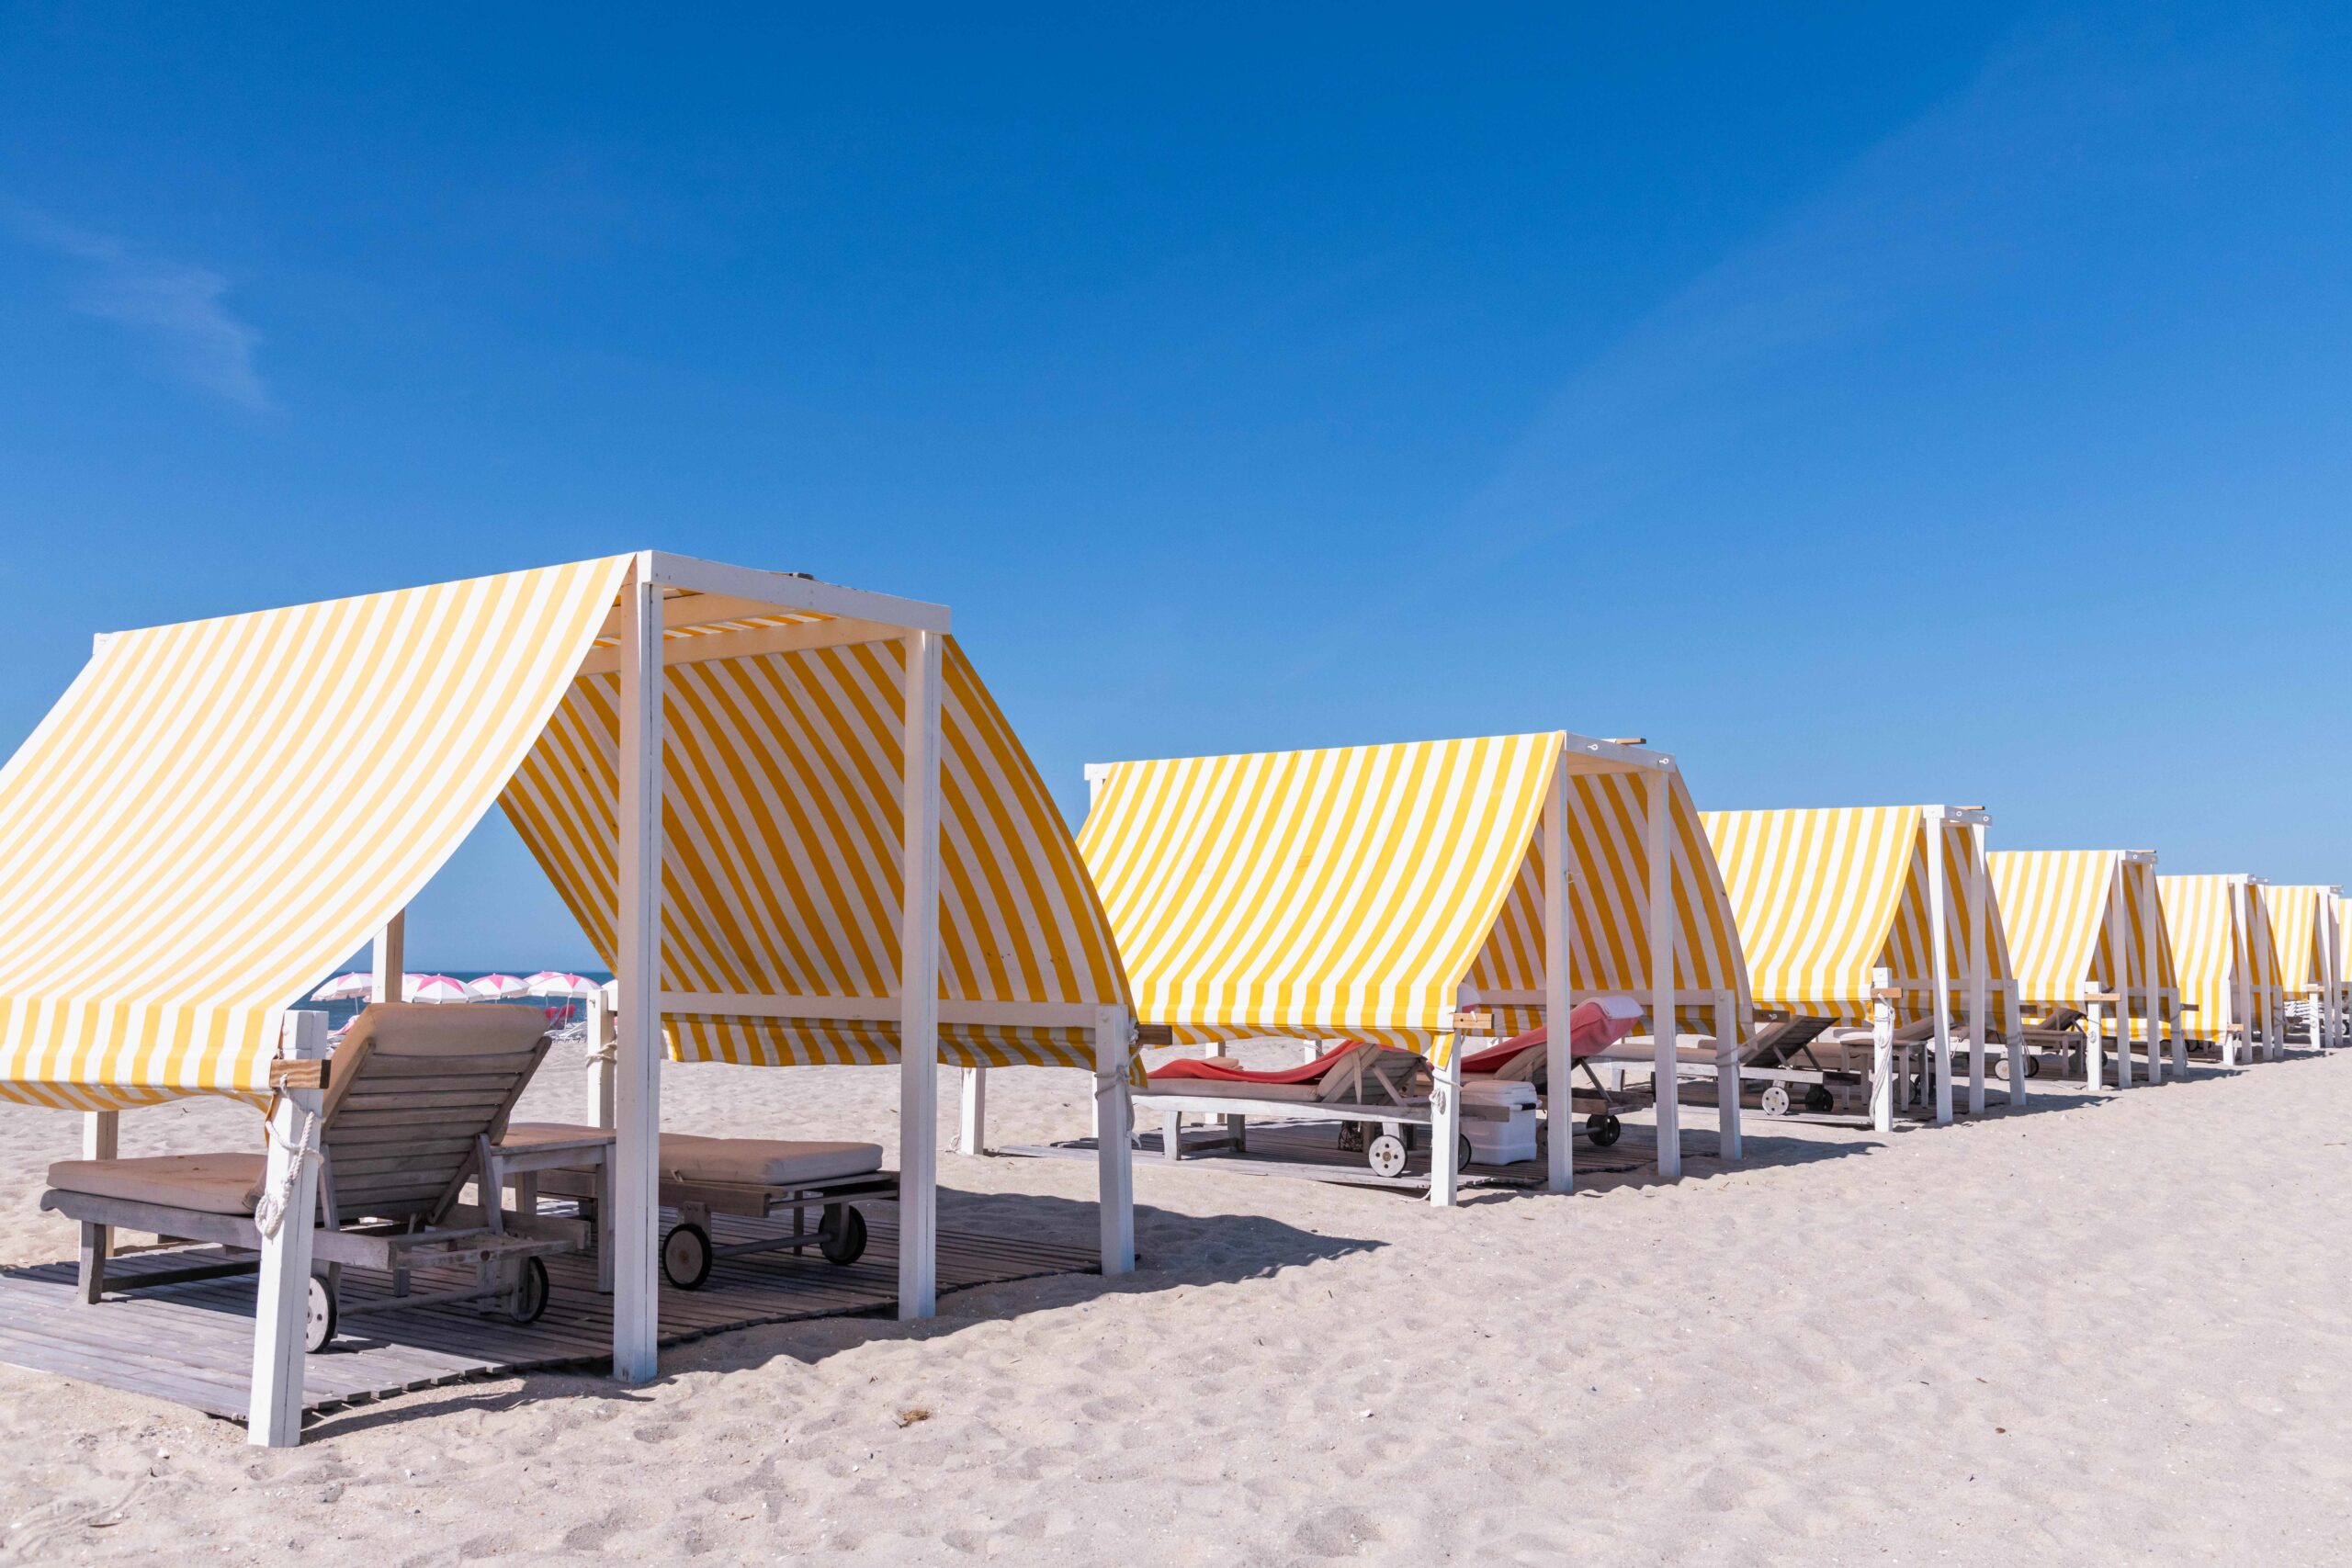 Yellow and white beach cabanas from Congress Hall on the beach with a clear blue sky